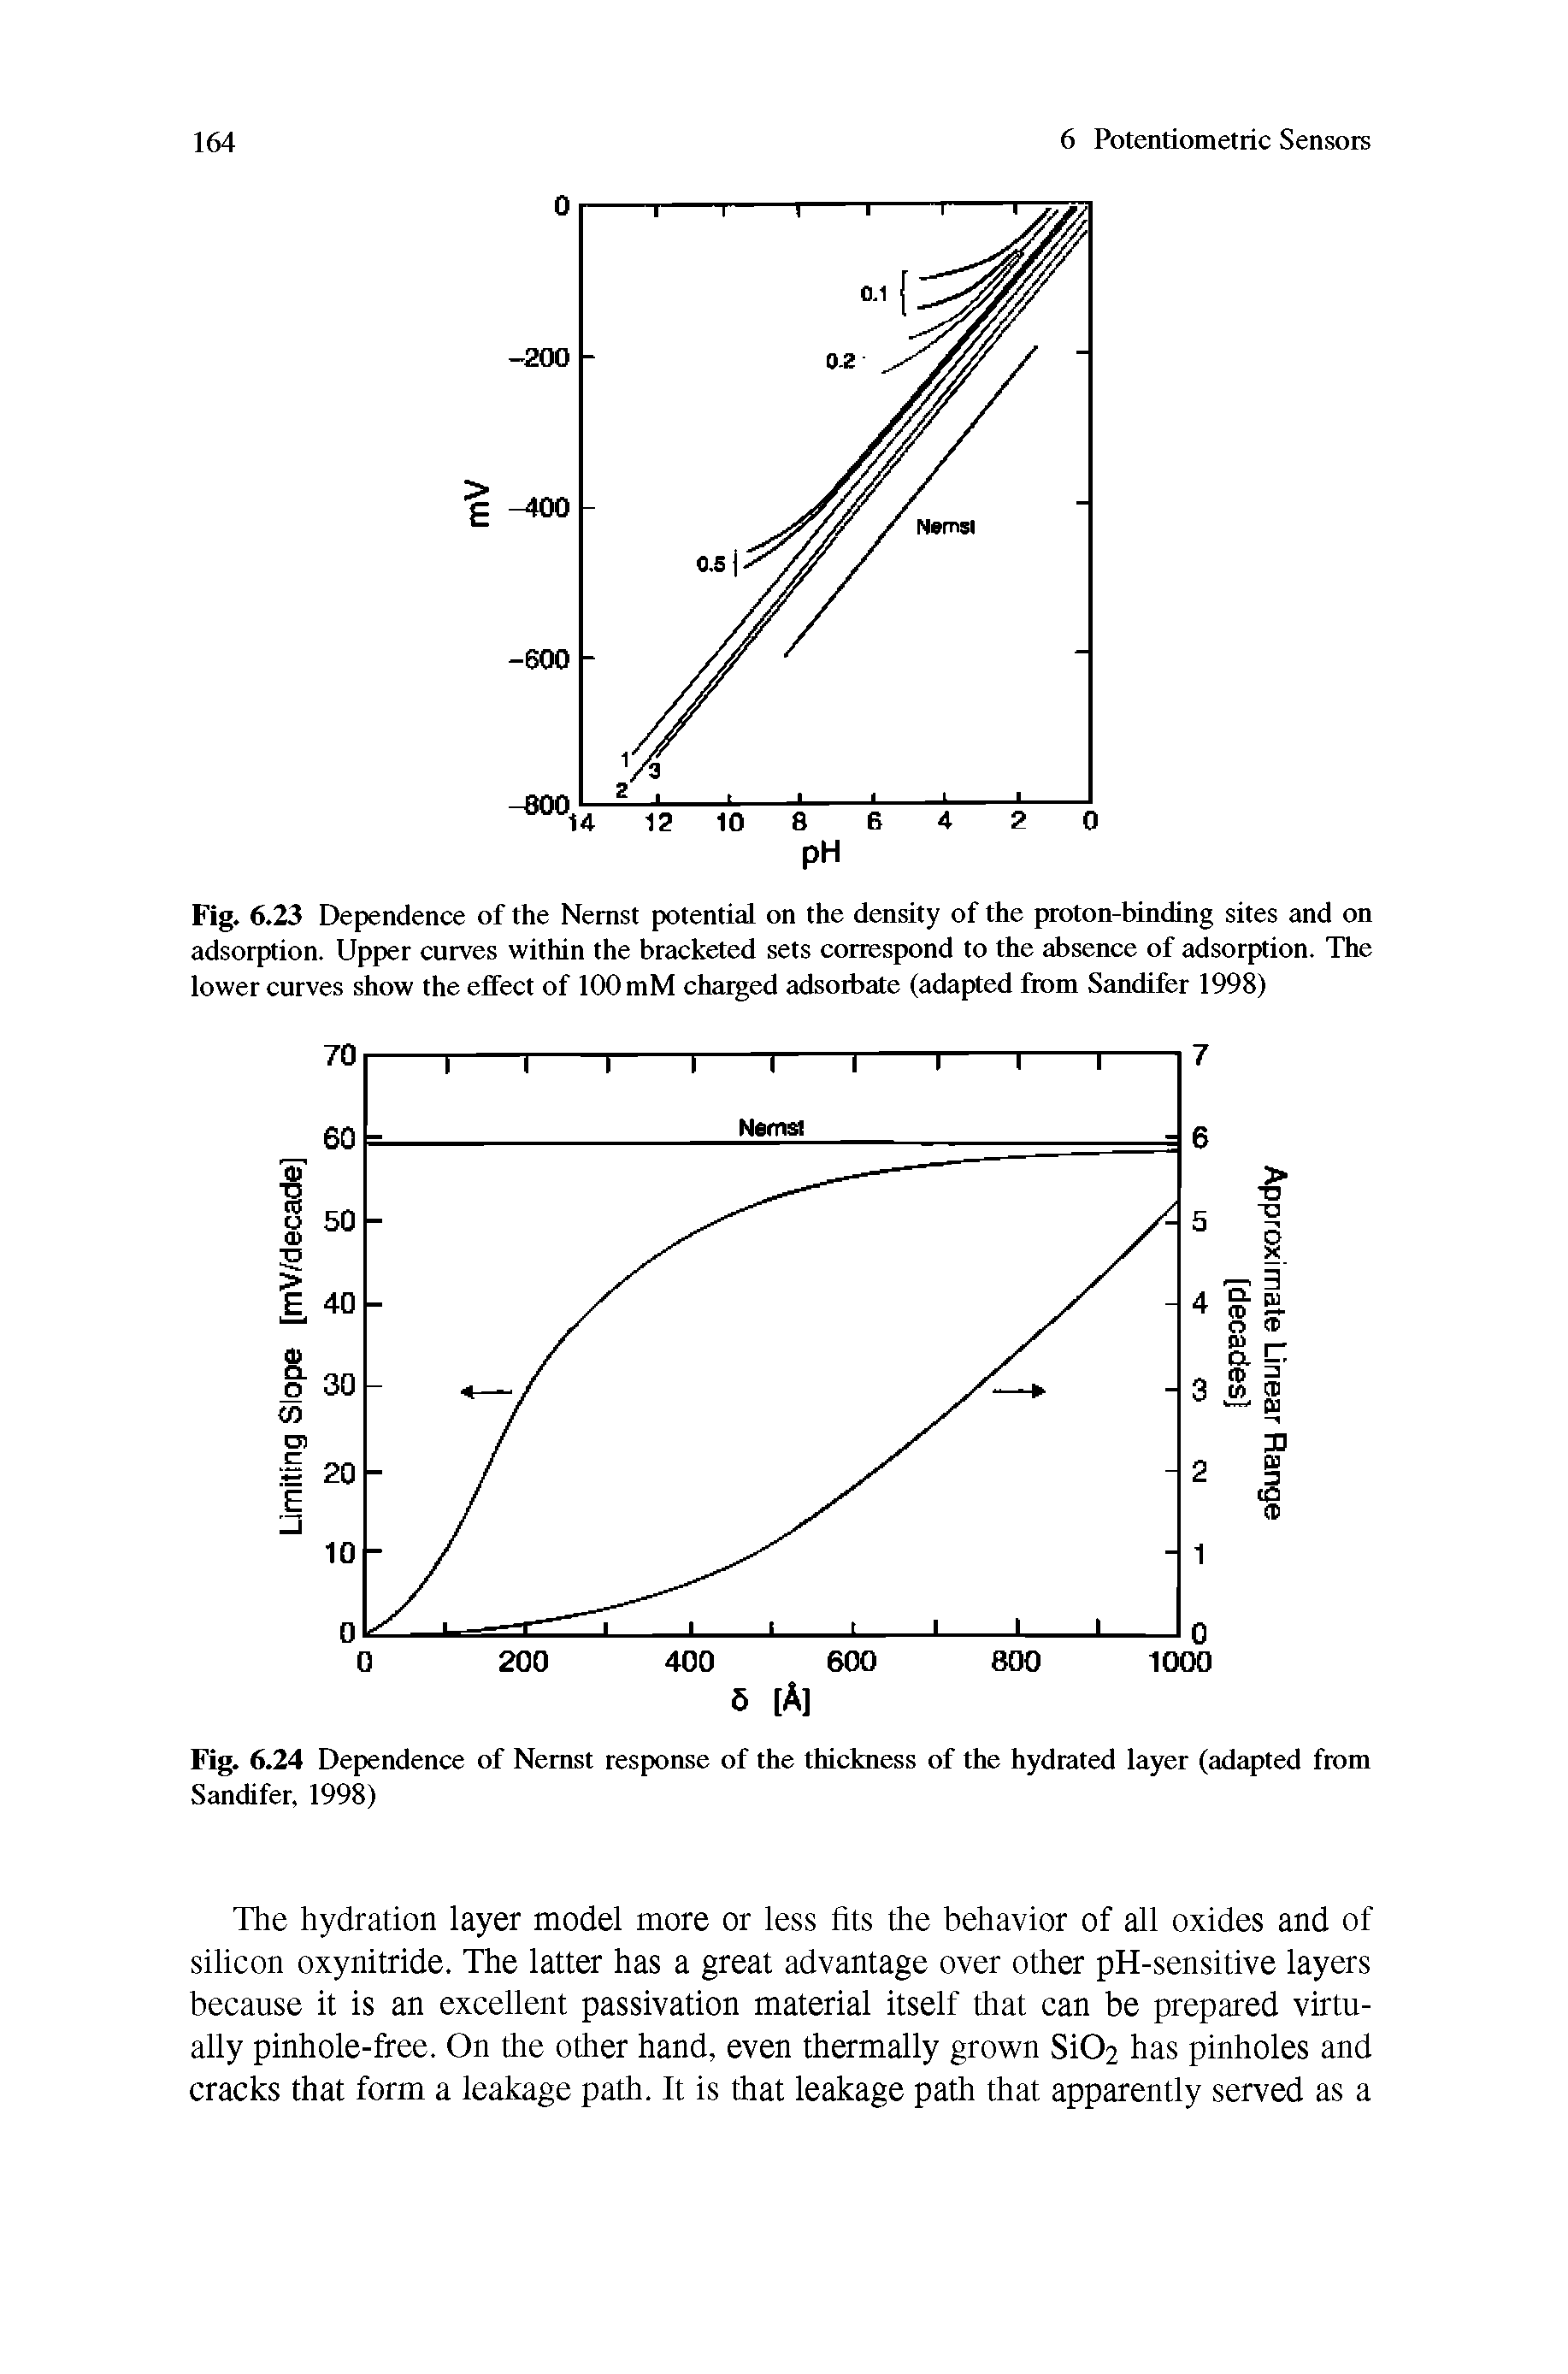 Fig. 6.23 Dependence of the Nemst potential on the density of the proton-binding sites and on adsorption. Upper curves within the bracketed sets correspond to the absence of adsorption. The lower curves show the effect of 100 mM charged adsorbate (adapted from Sandifer 1998)...